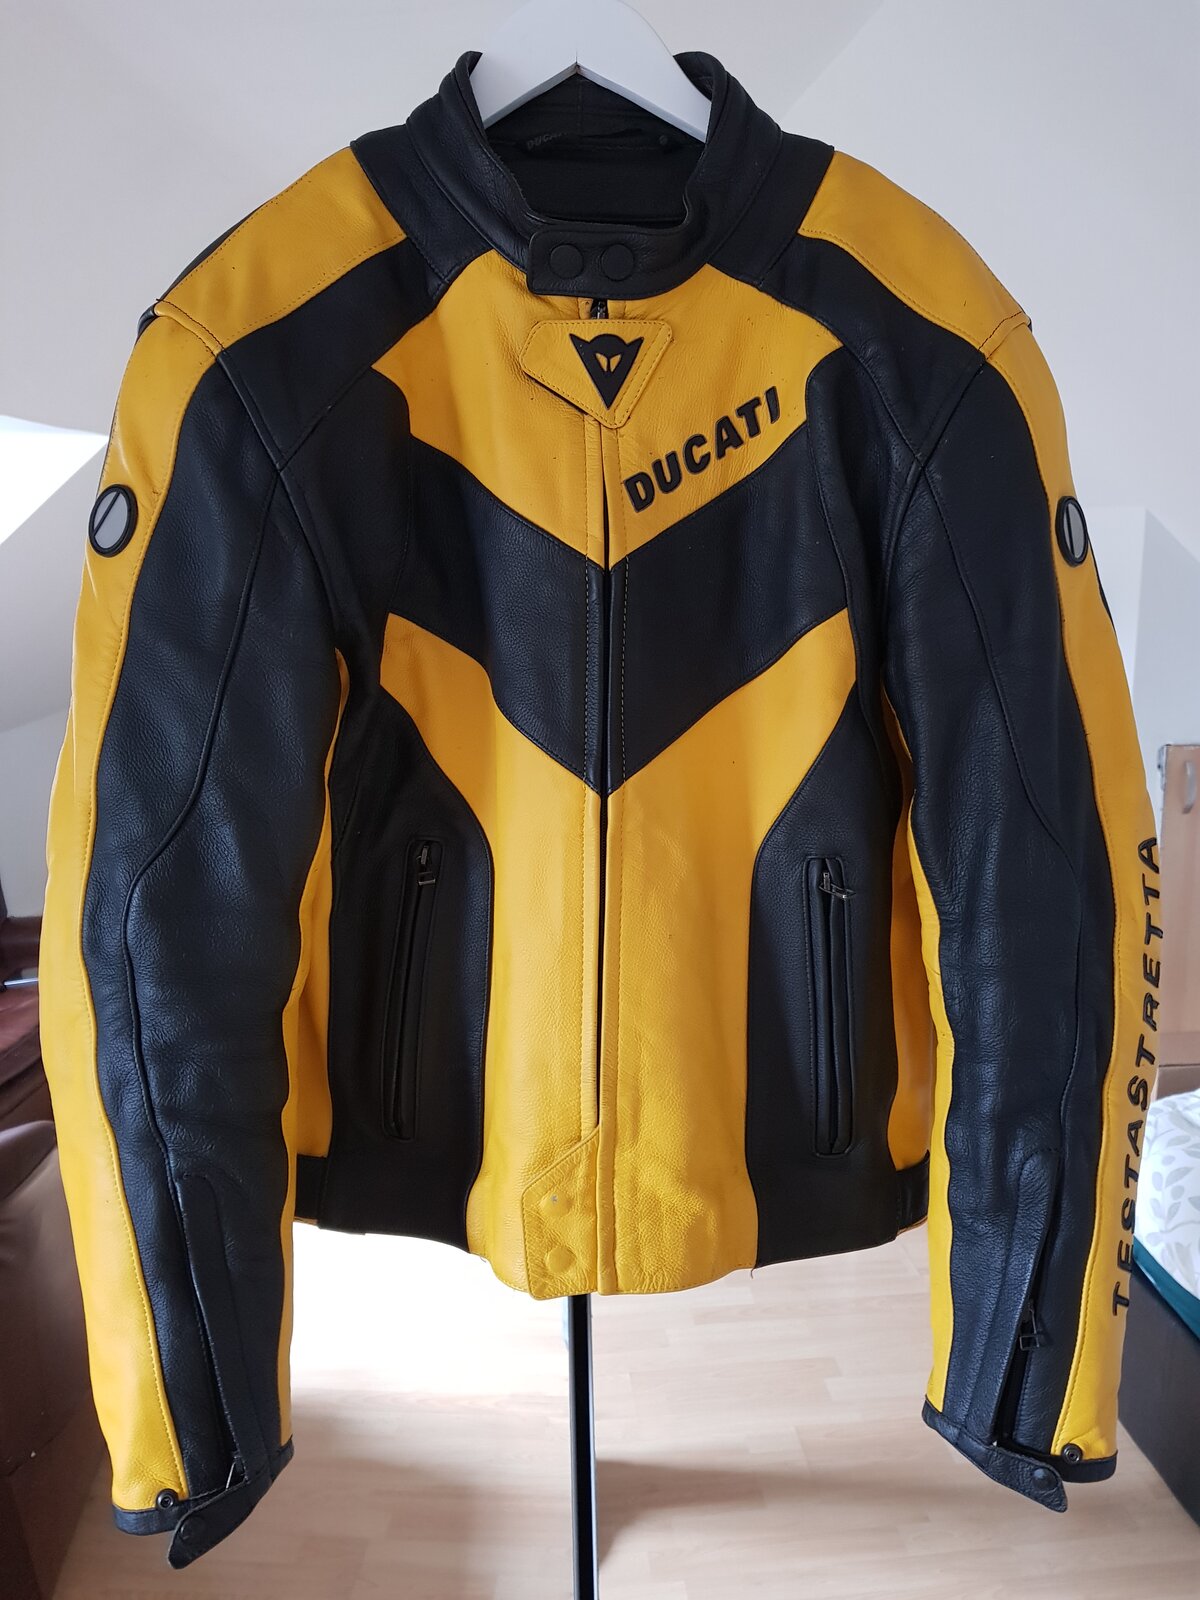 For Sale - Ducati Leather Jacket Testastretta Size 54 L *reduced ...